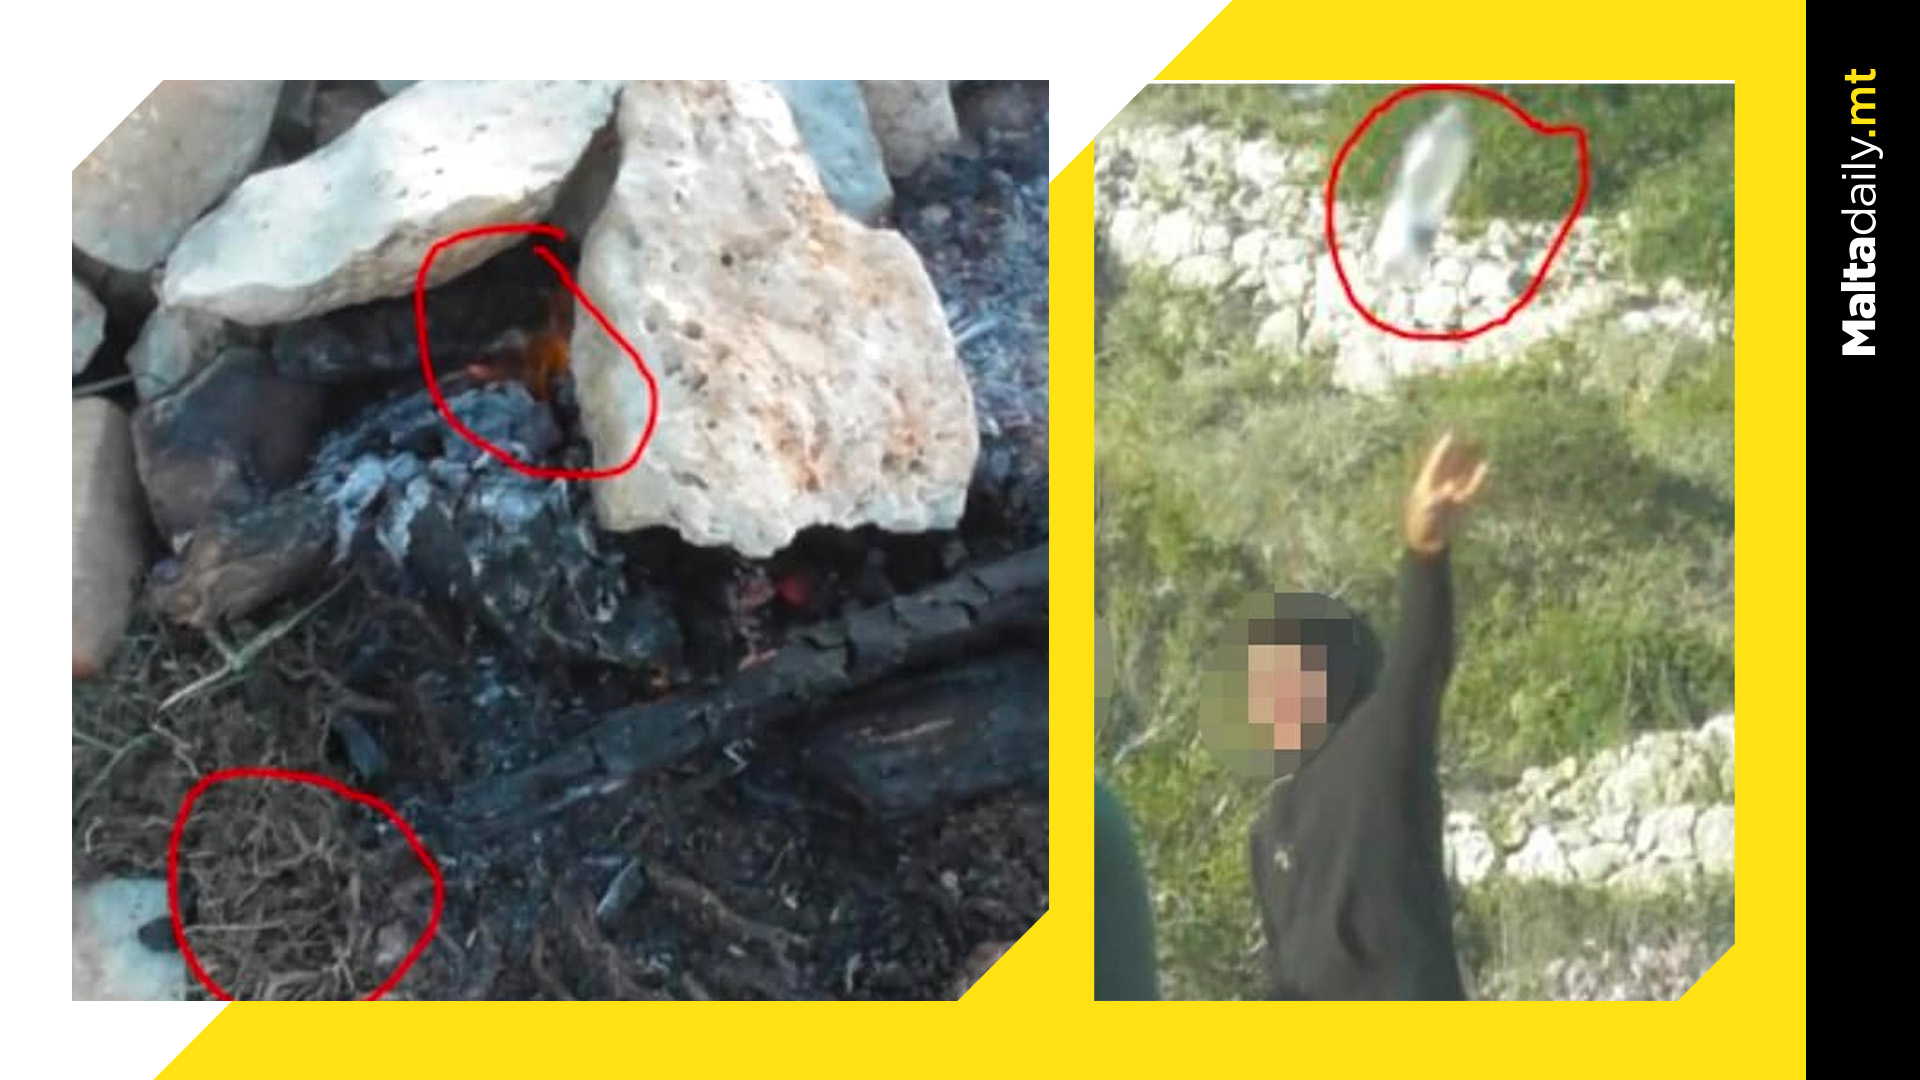 6 people reported by Malta Rangers for littering and illegal fire at Għar Lapsi